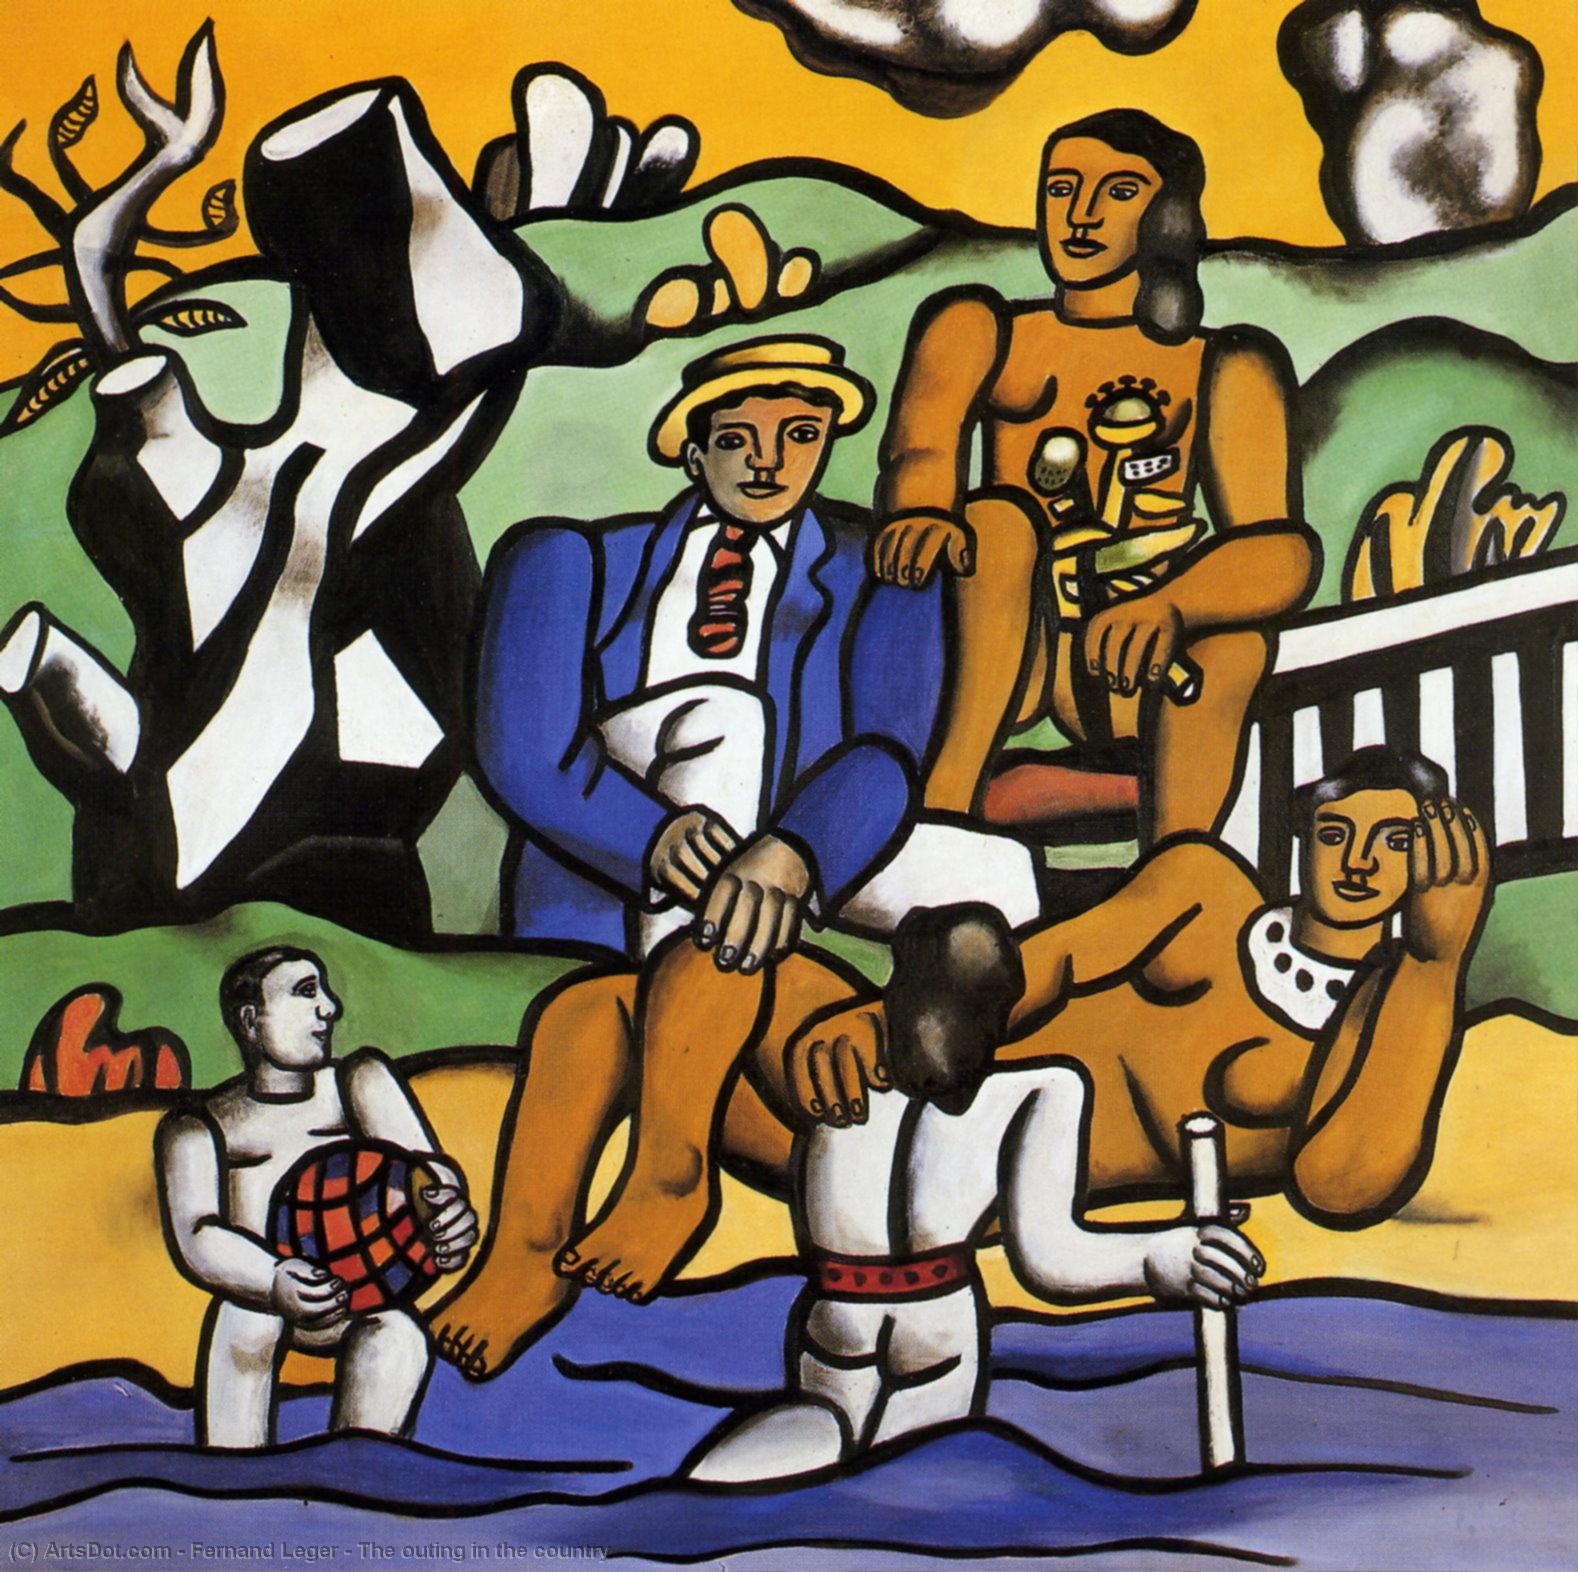 WikiOO.org - 백과 사전 - 회화, 삽화 Fernand Leger - The outing in the country